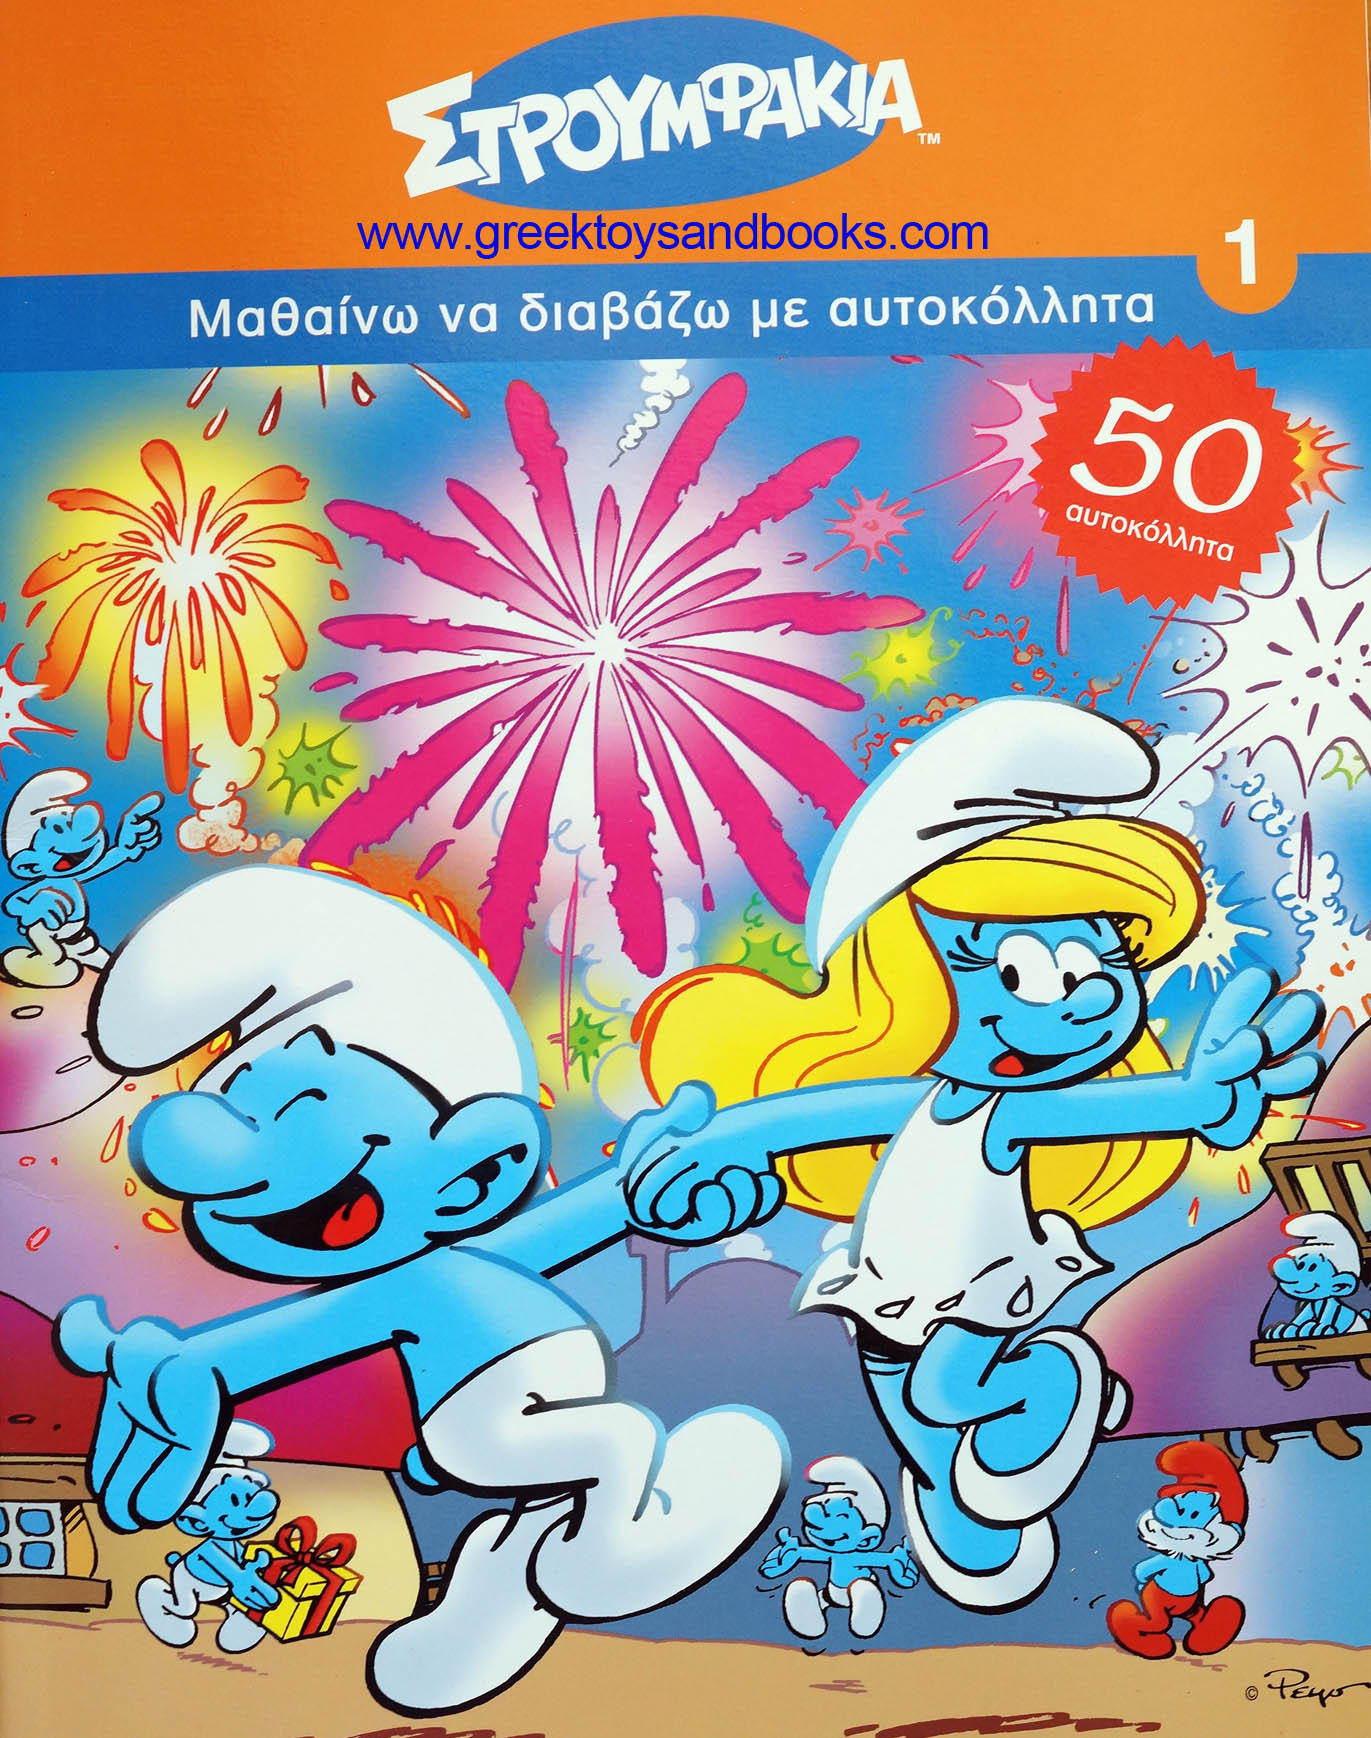 Smurfs Learning to Read